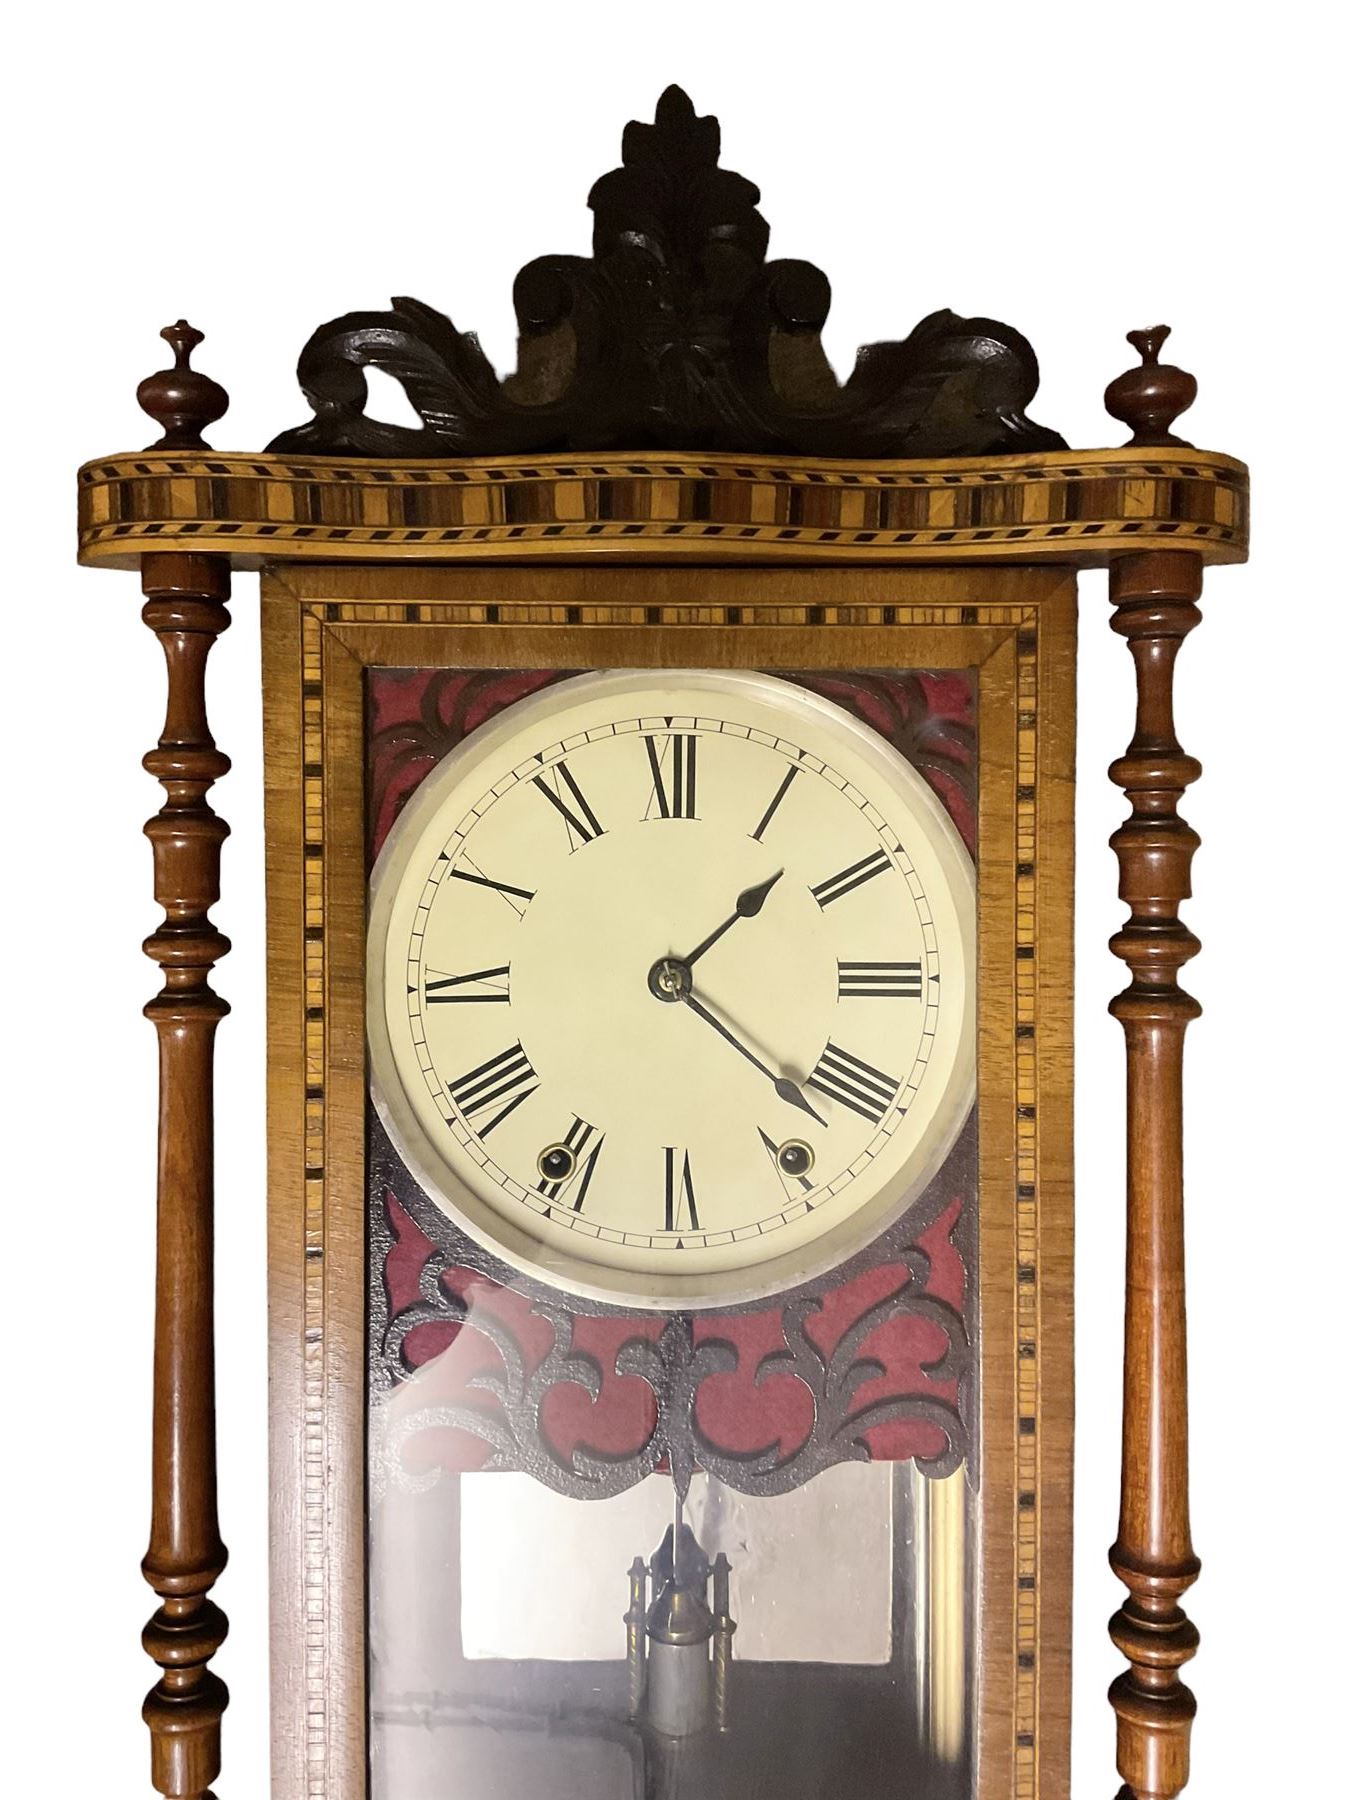 New Haven - American late 19th-century 8-day walnut and parquetry inlaid wall clock - Image 2 of 5